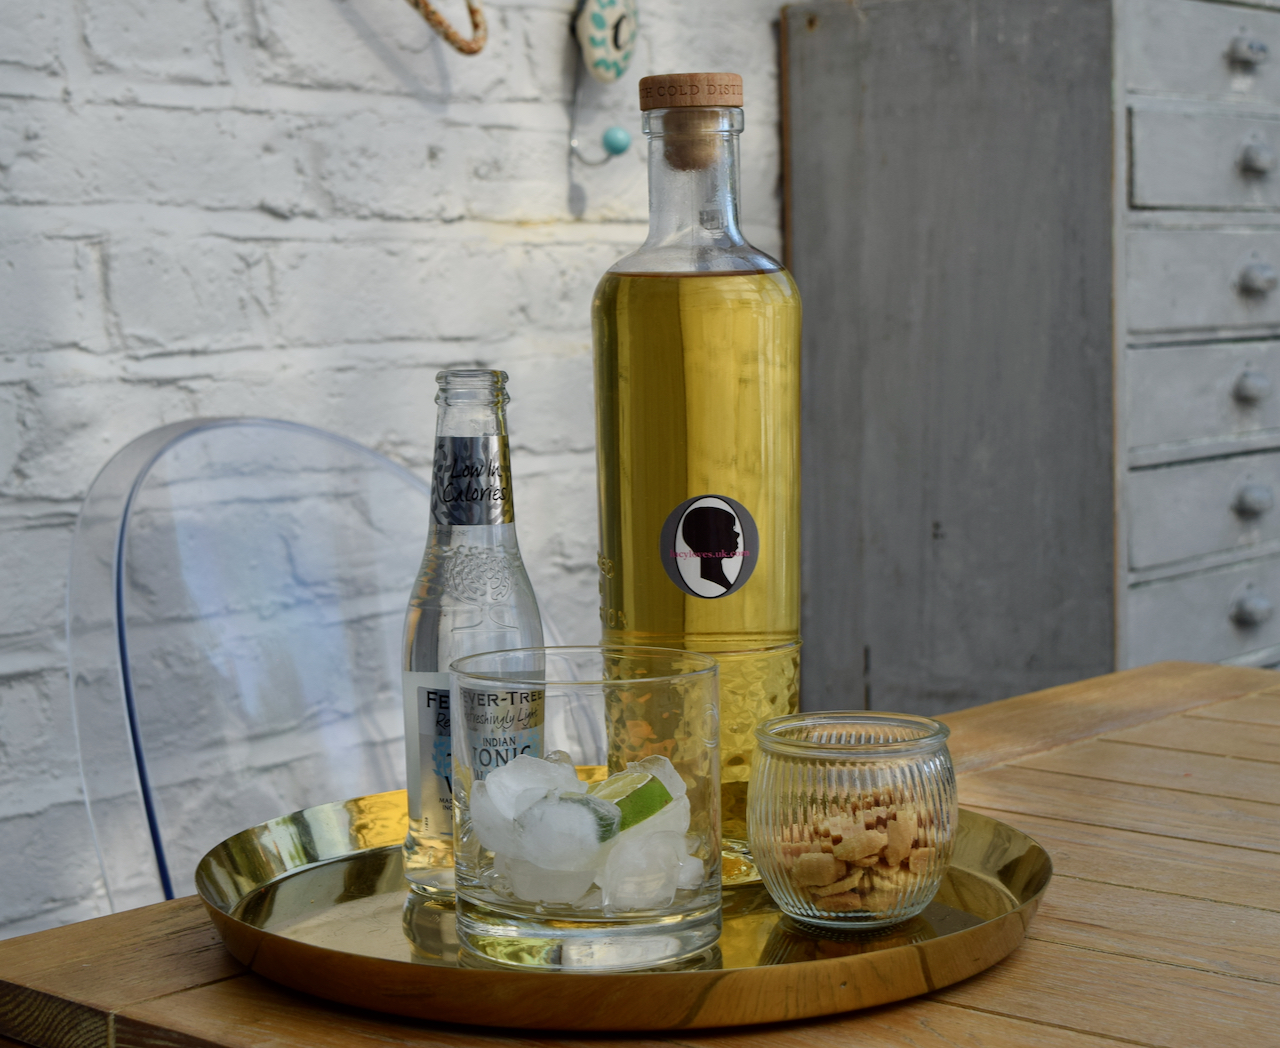 Homemade Orange and Lime Gin recipe from Lucy Loves Food Blog